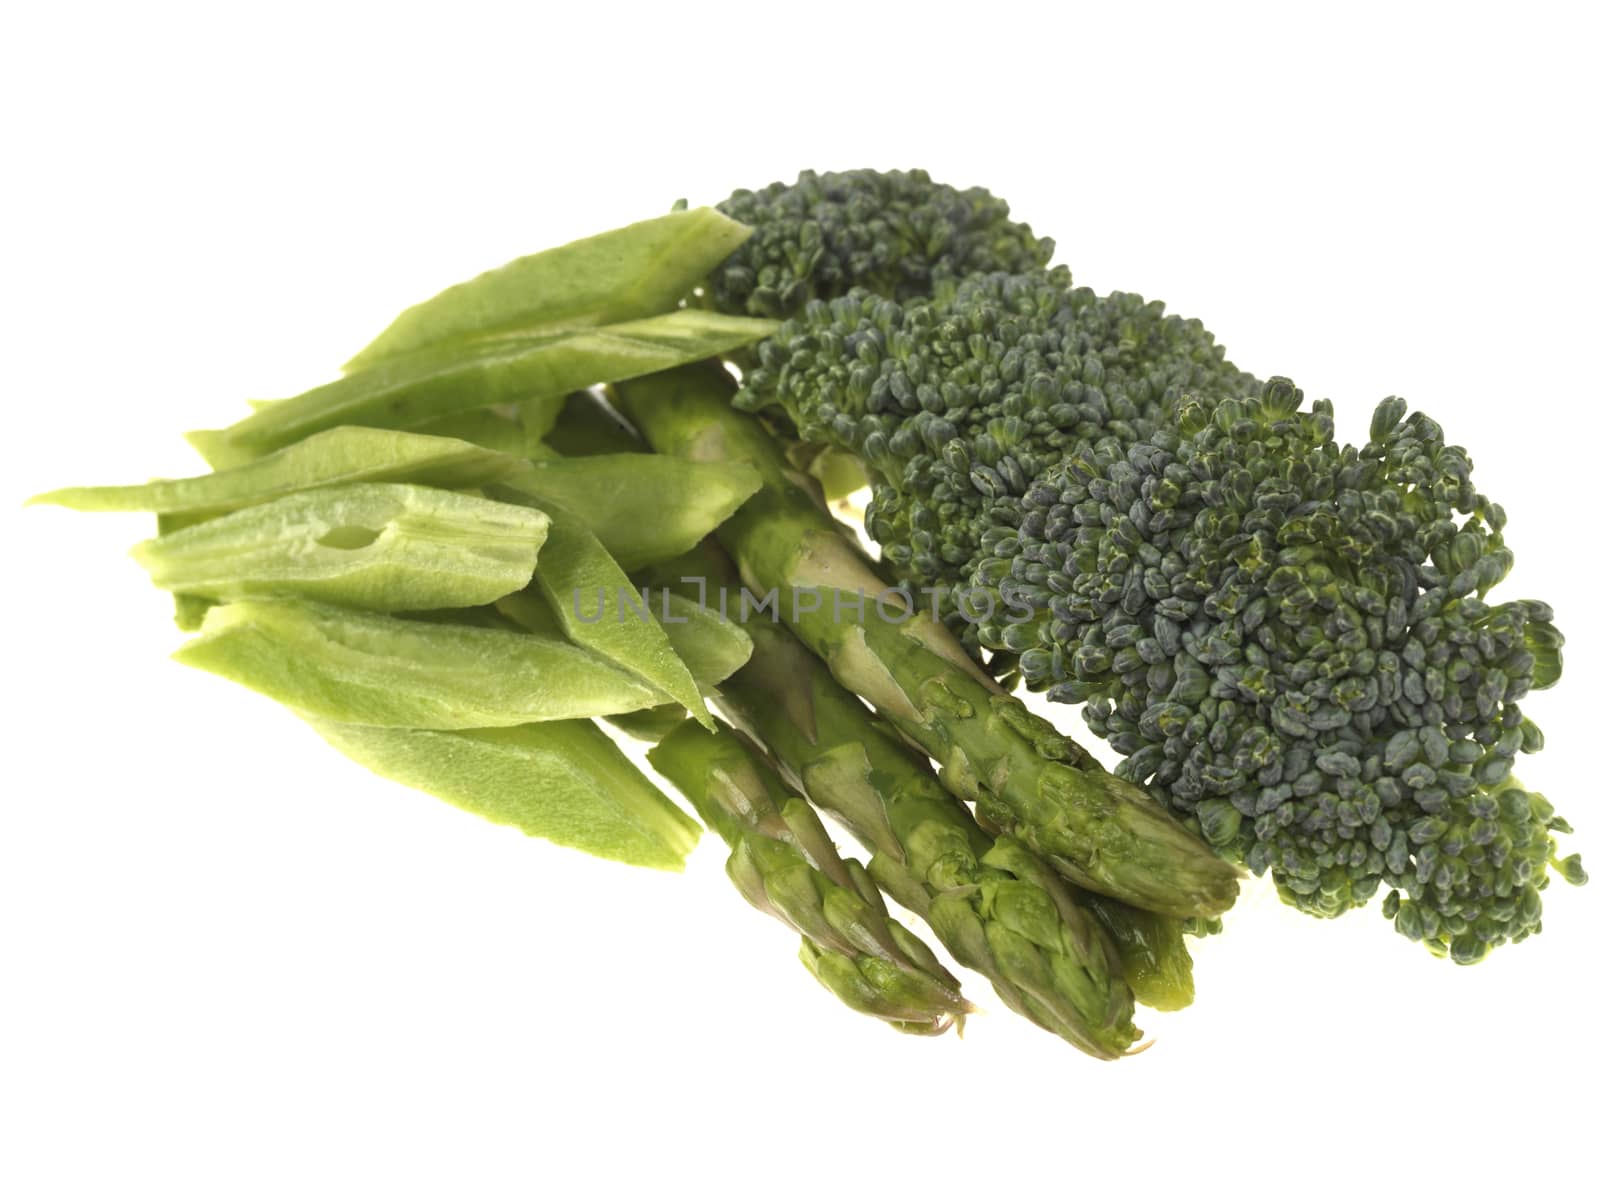 Fresh Raw Uncooked Vegetables Broccoli Asparagus and Runner Beans Isolated White Background